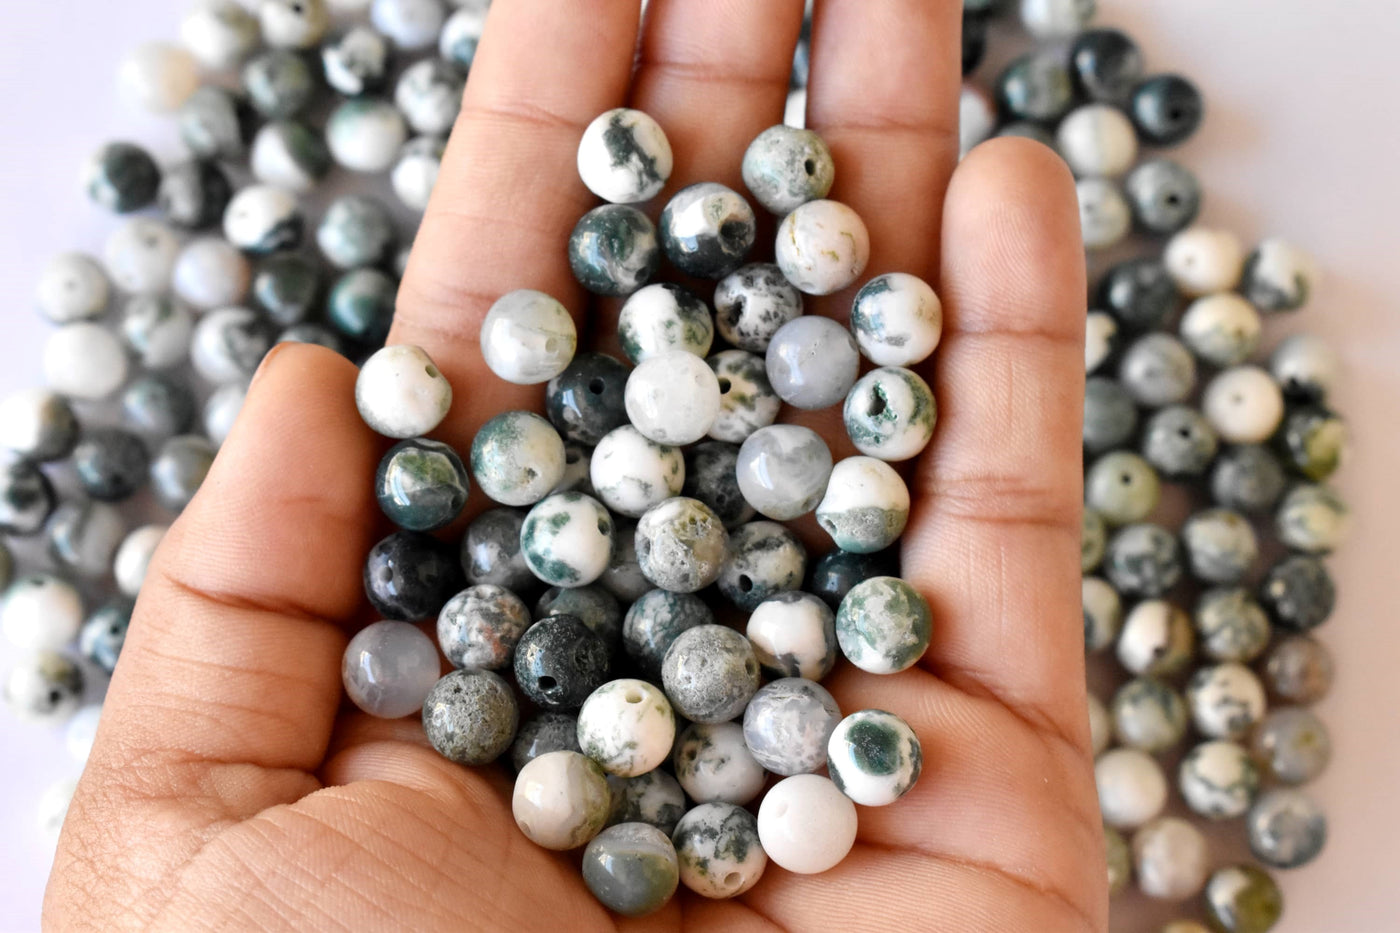 Tree Agate Beads, Natural Round Crystal Beads 4mm to 10mm